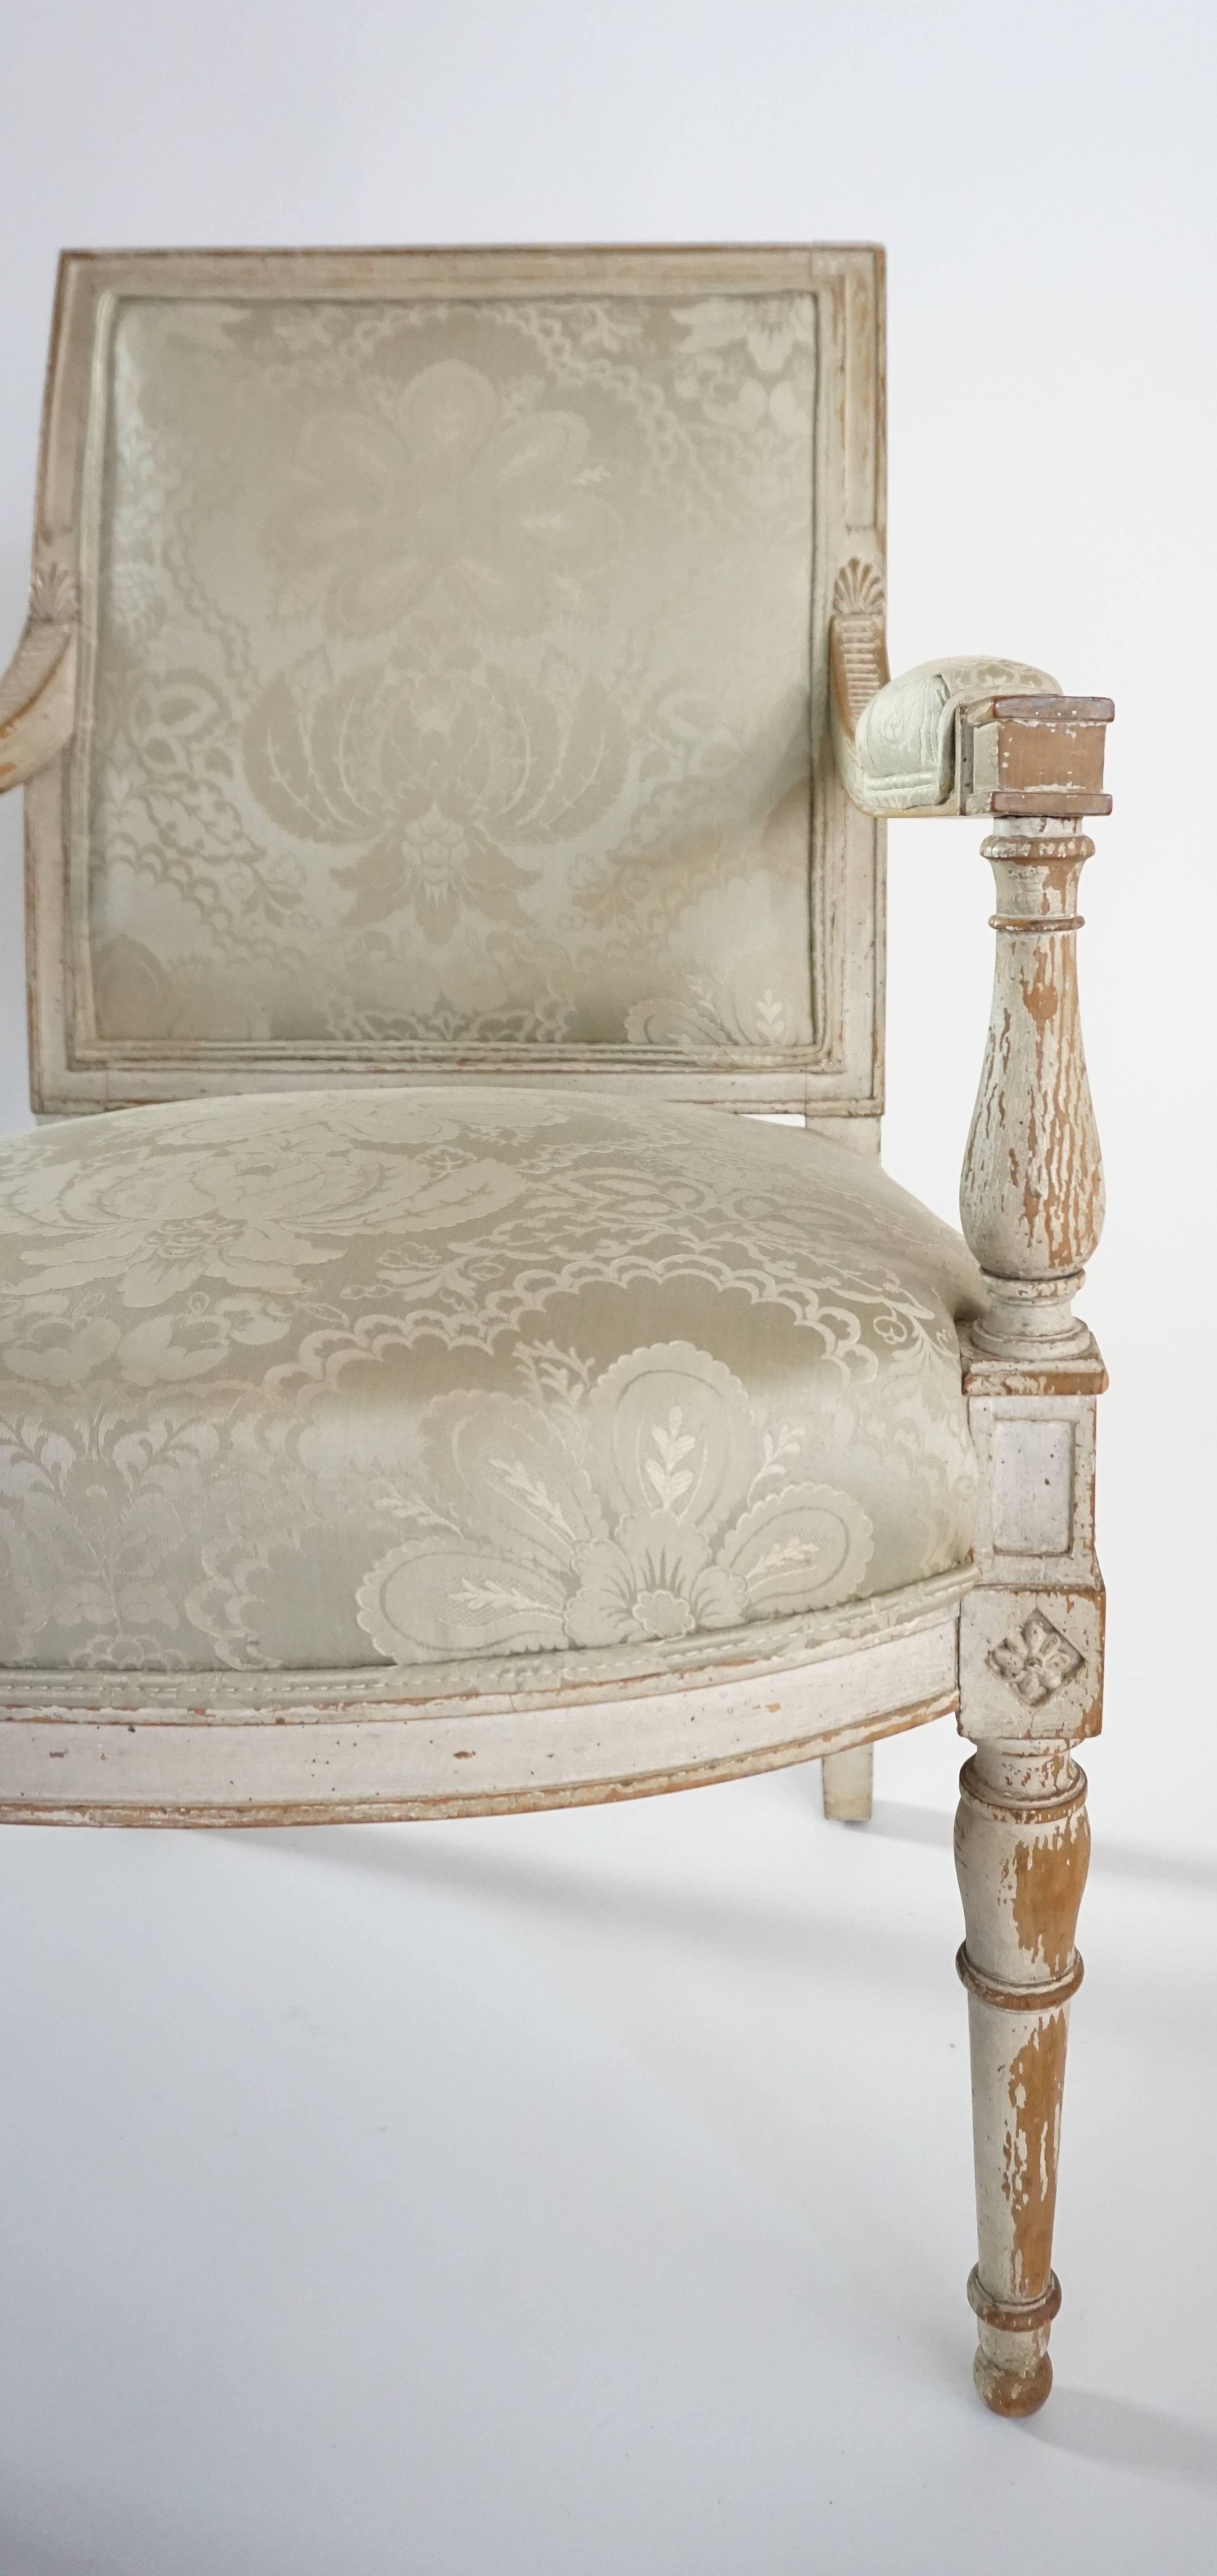 Late 18th Century French Directoire Fauteuil or Armchair in Original Paint, circa 1795